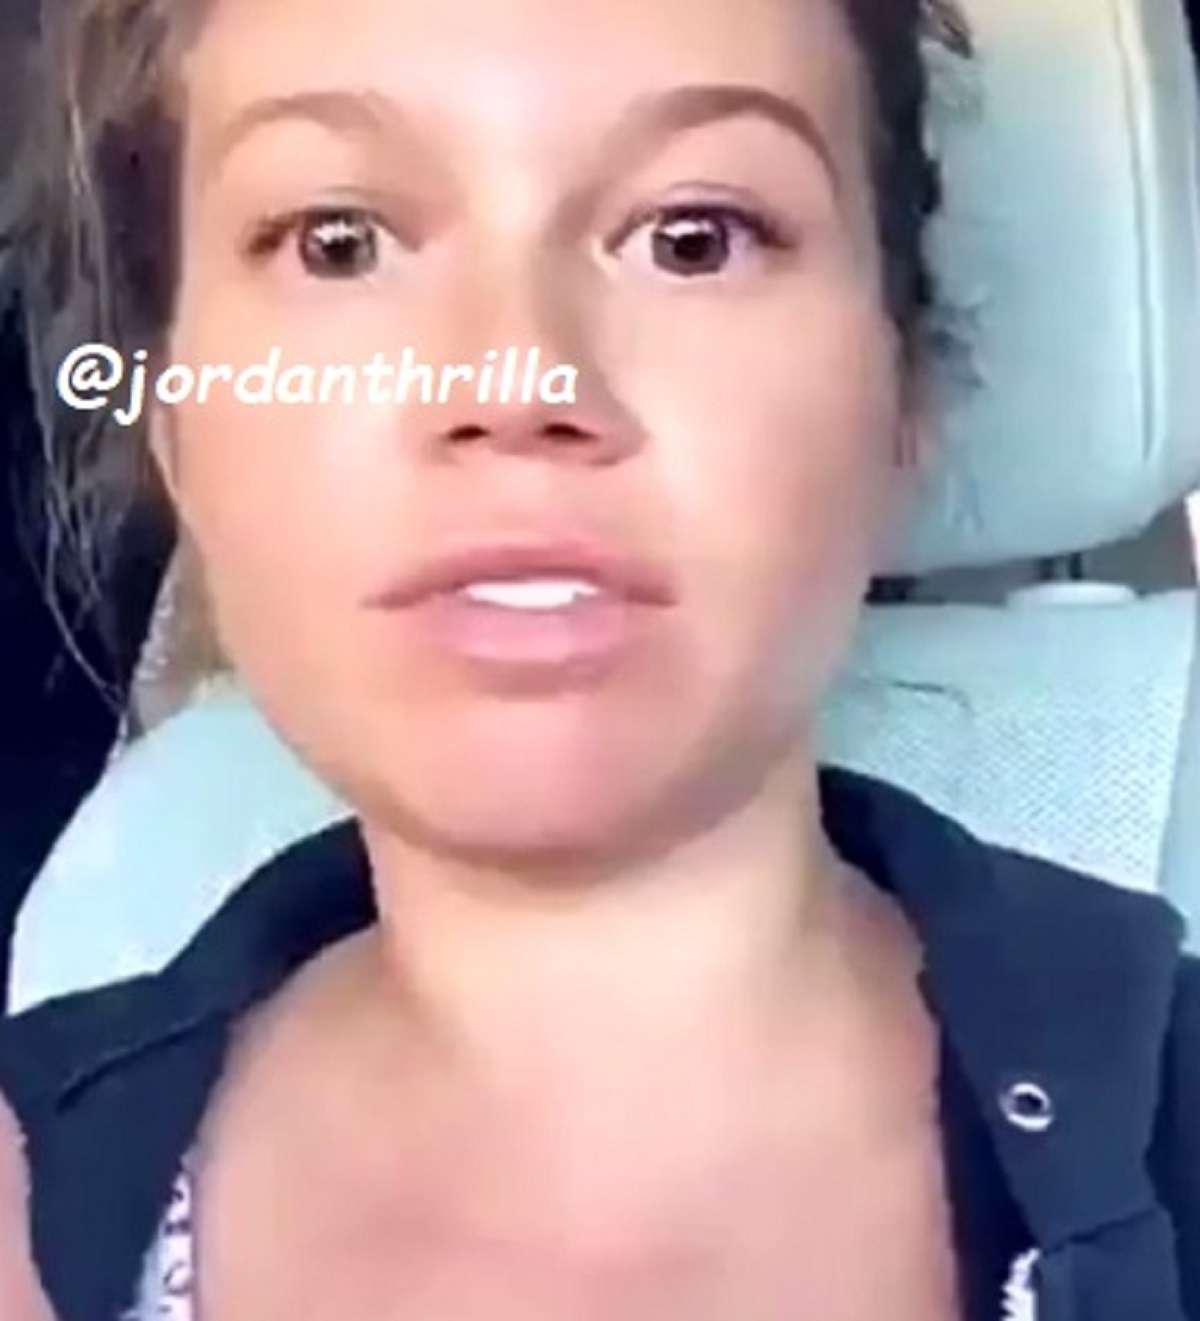 Chanel West Coast Goes On Crying Rant About Not Getting "Likes" On Instagram and Twitter